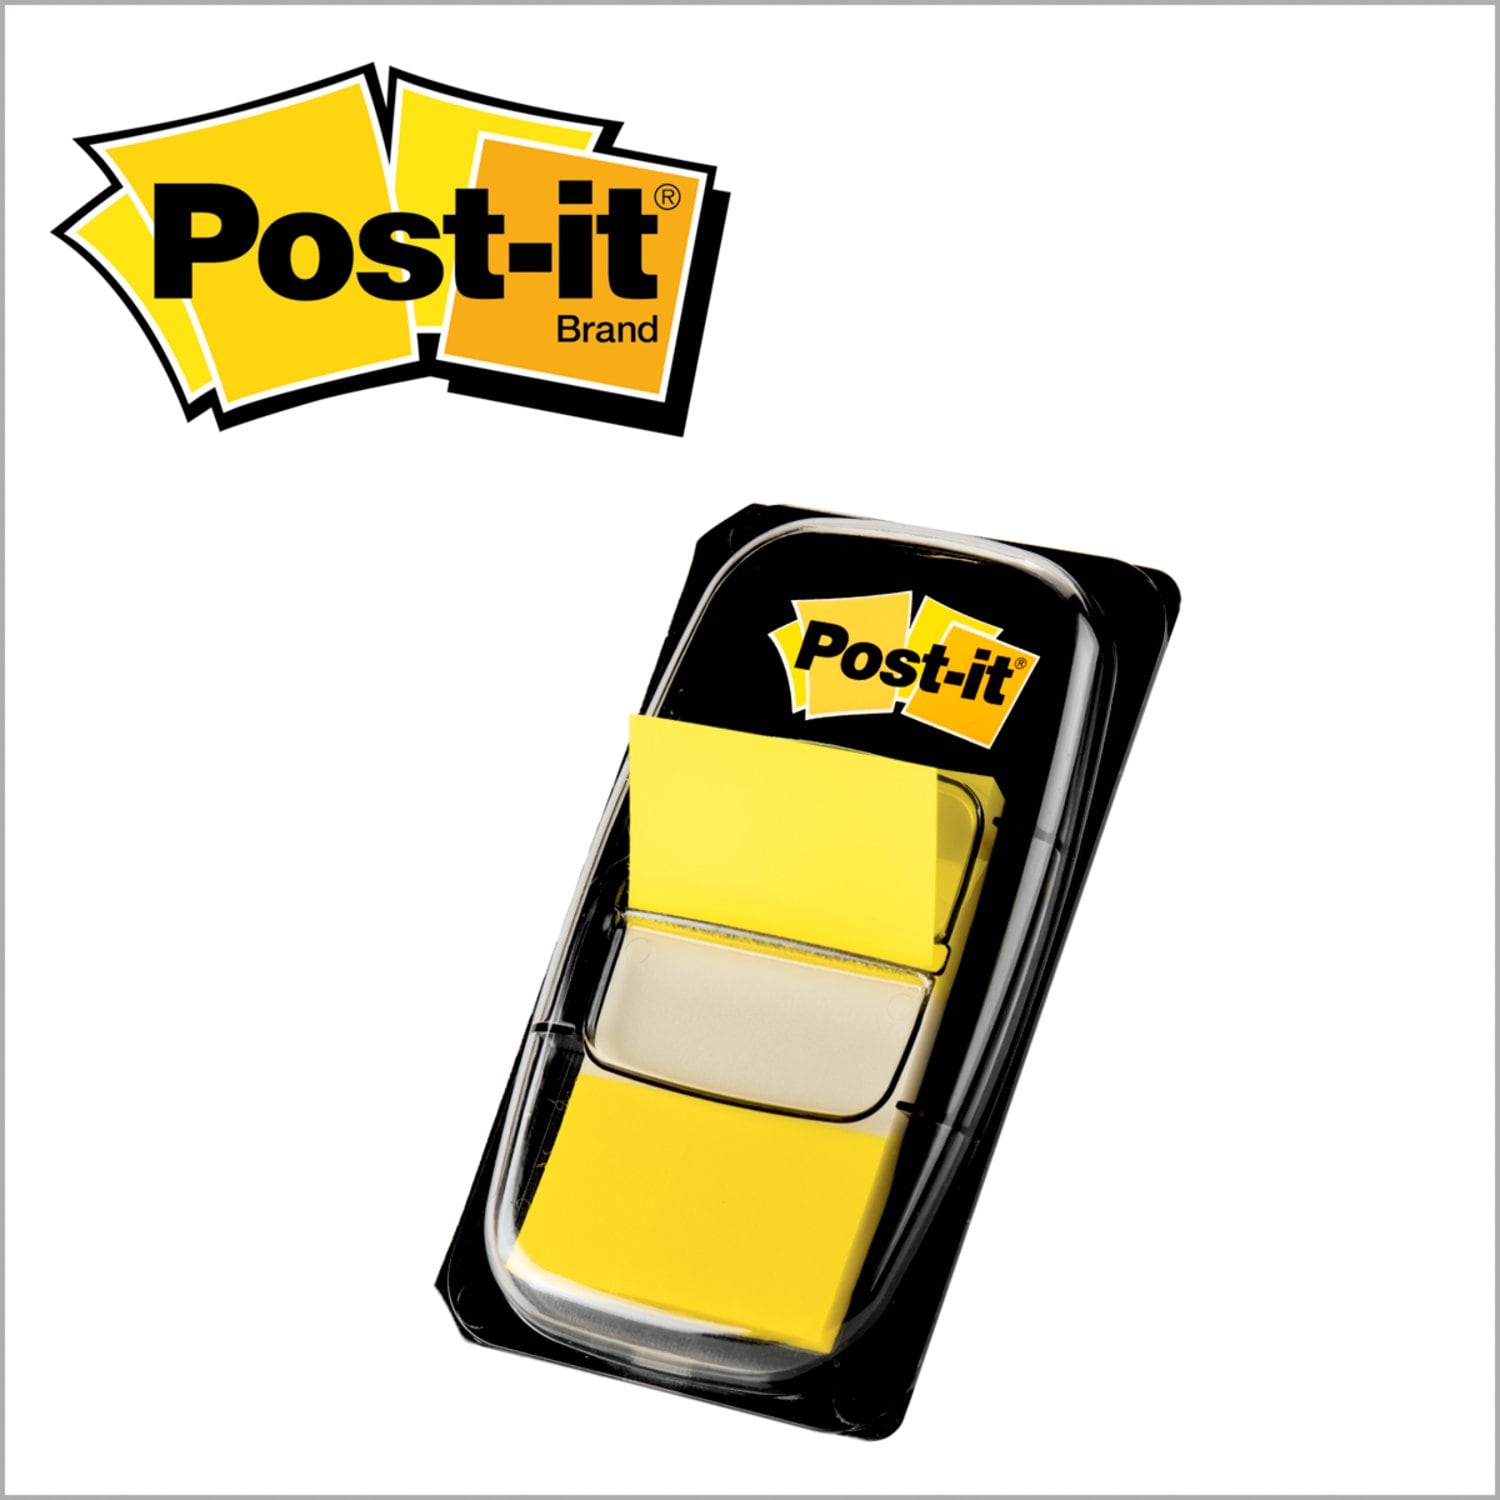 7010383983 - Post-it Flags 680-YW12, 1 in. x 1.7 in. (25.4 mm x 43.2 mm) Canary
Yellow 12 disp/box 4 bx/cs